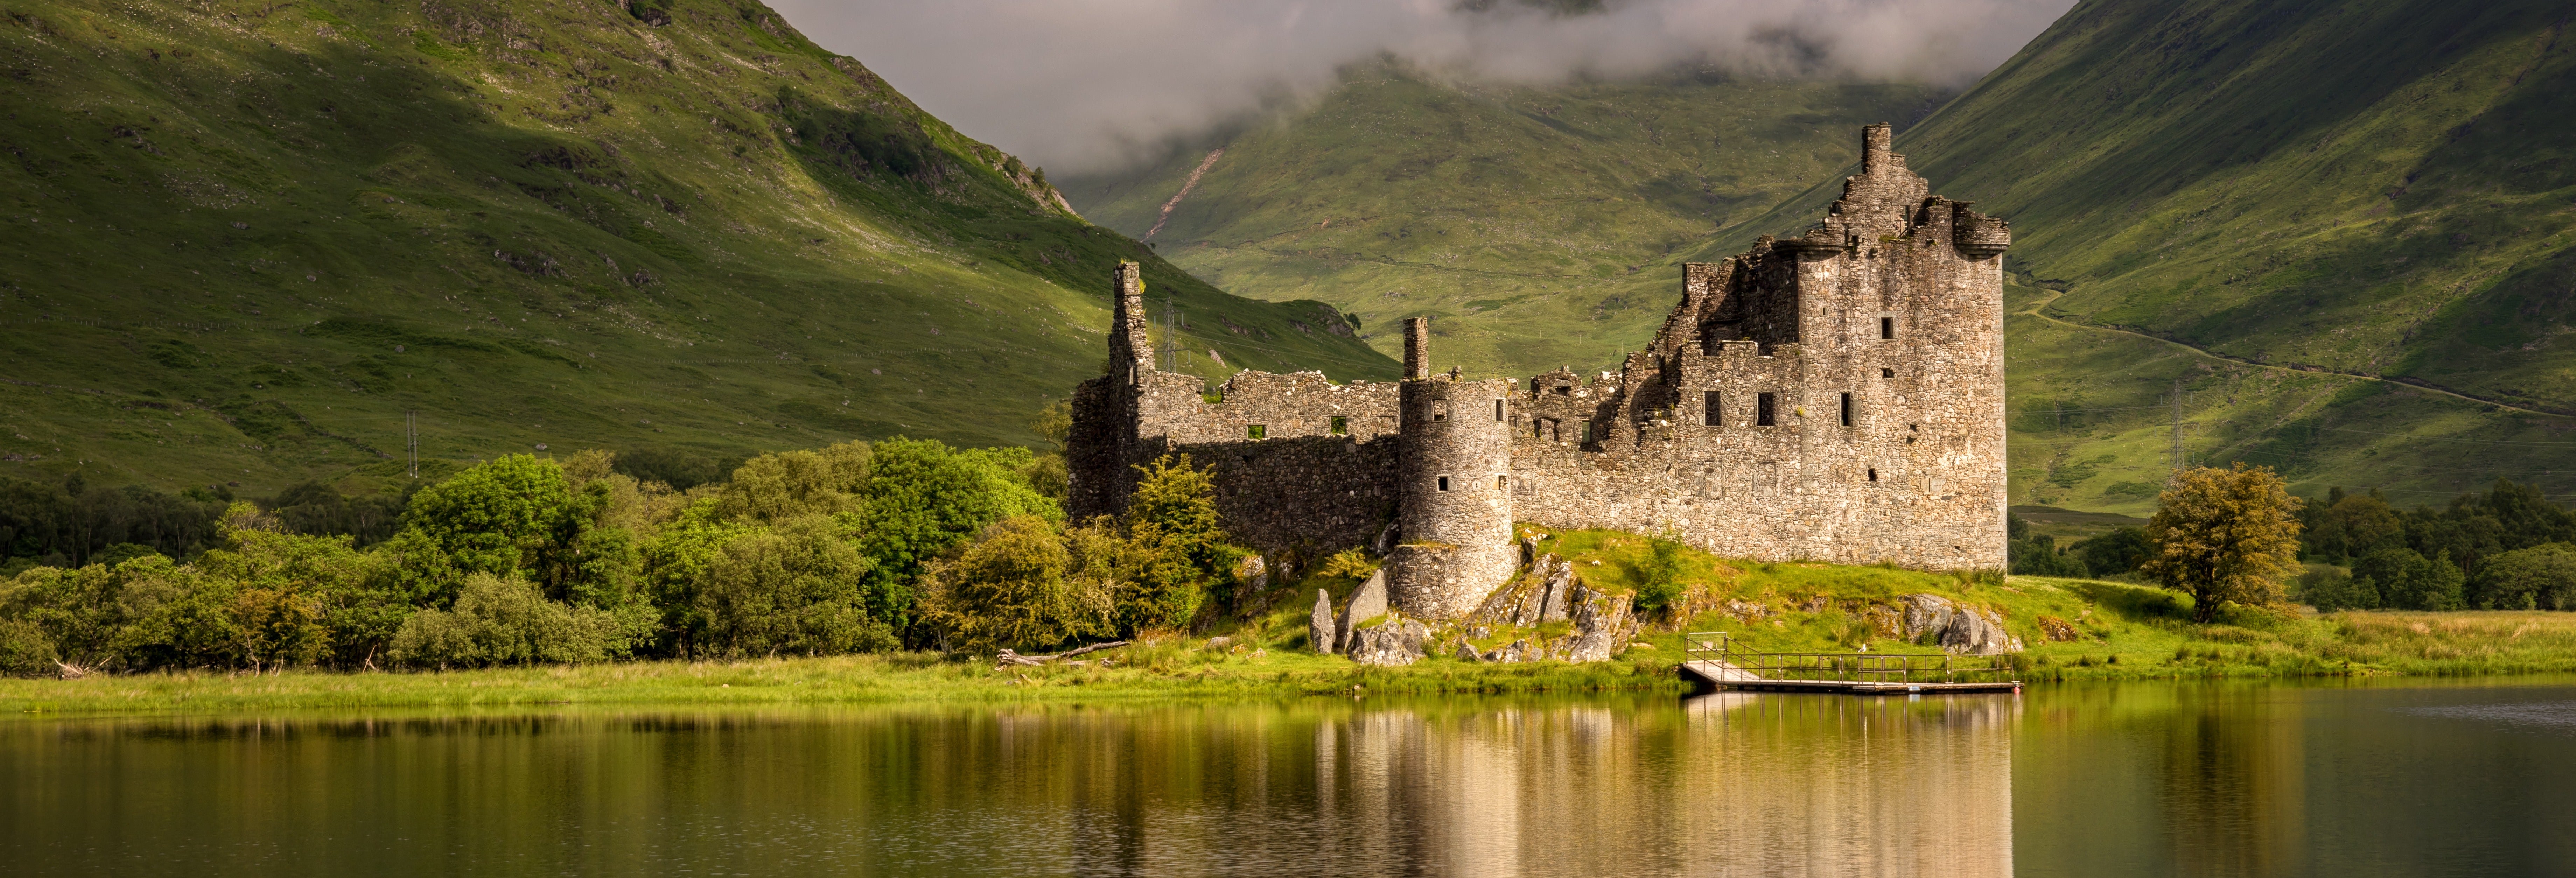 Loch Ness & the Scottish Highlands: 2 Day Tour